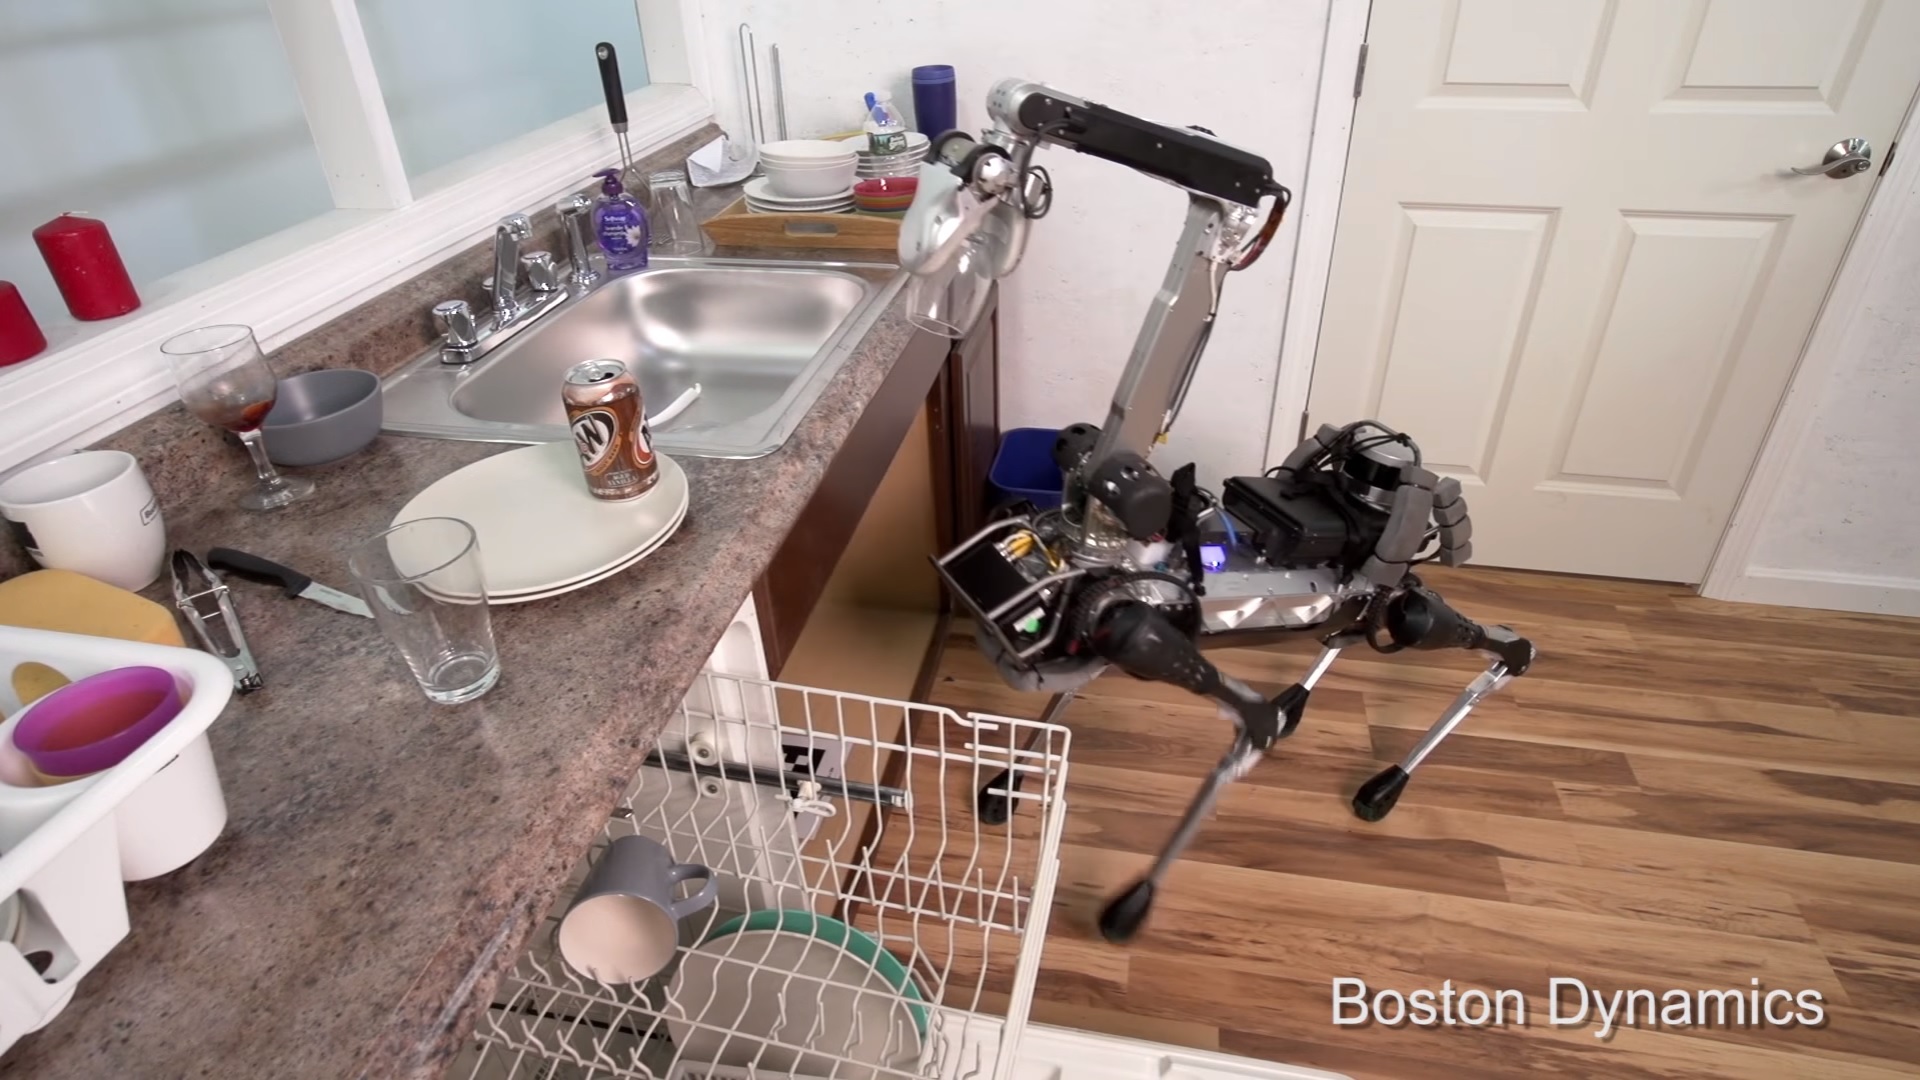 SpotMini is Boston Dynamics' latest can robot focused on homes